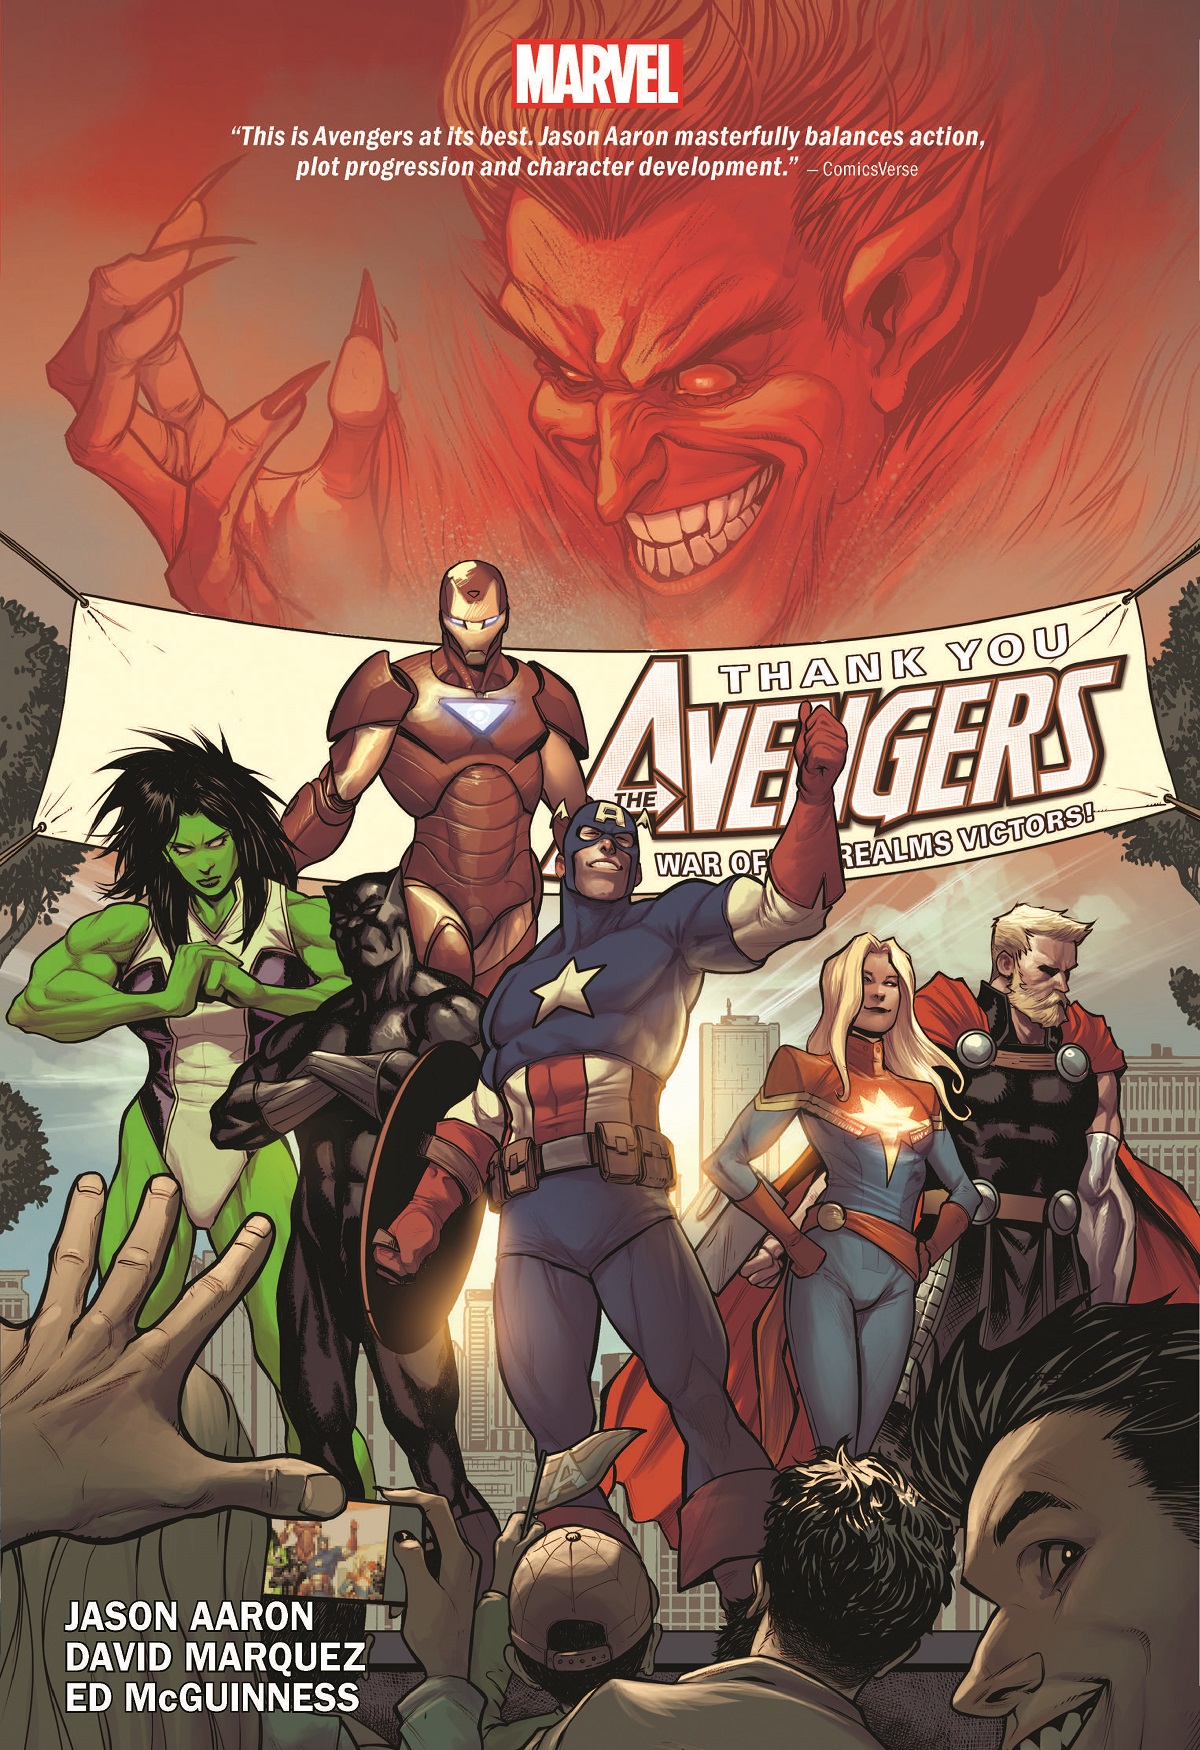 Avengers By Jason Aaron Vol. 2 (Hardcover)